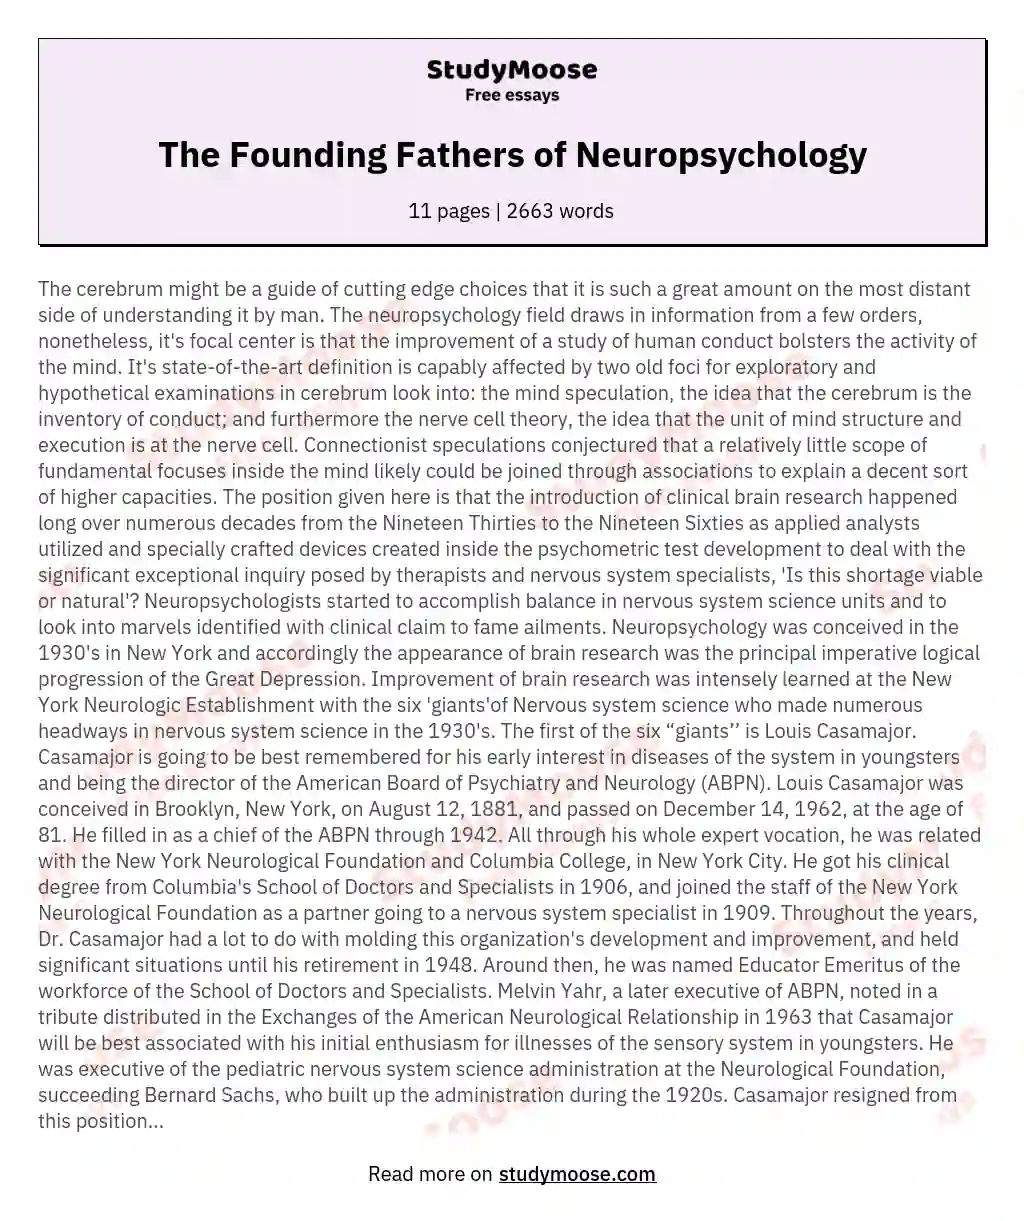 The Founding Fathers of Neuropsychology essay